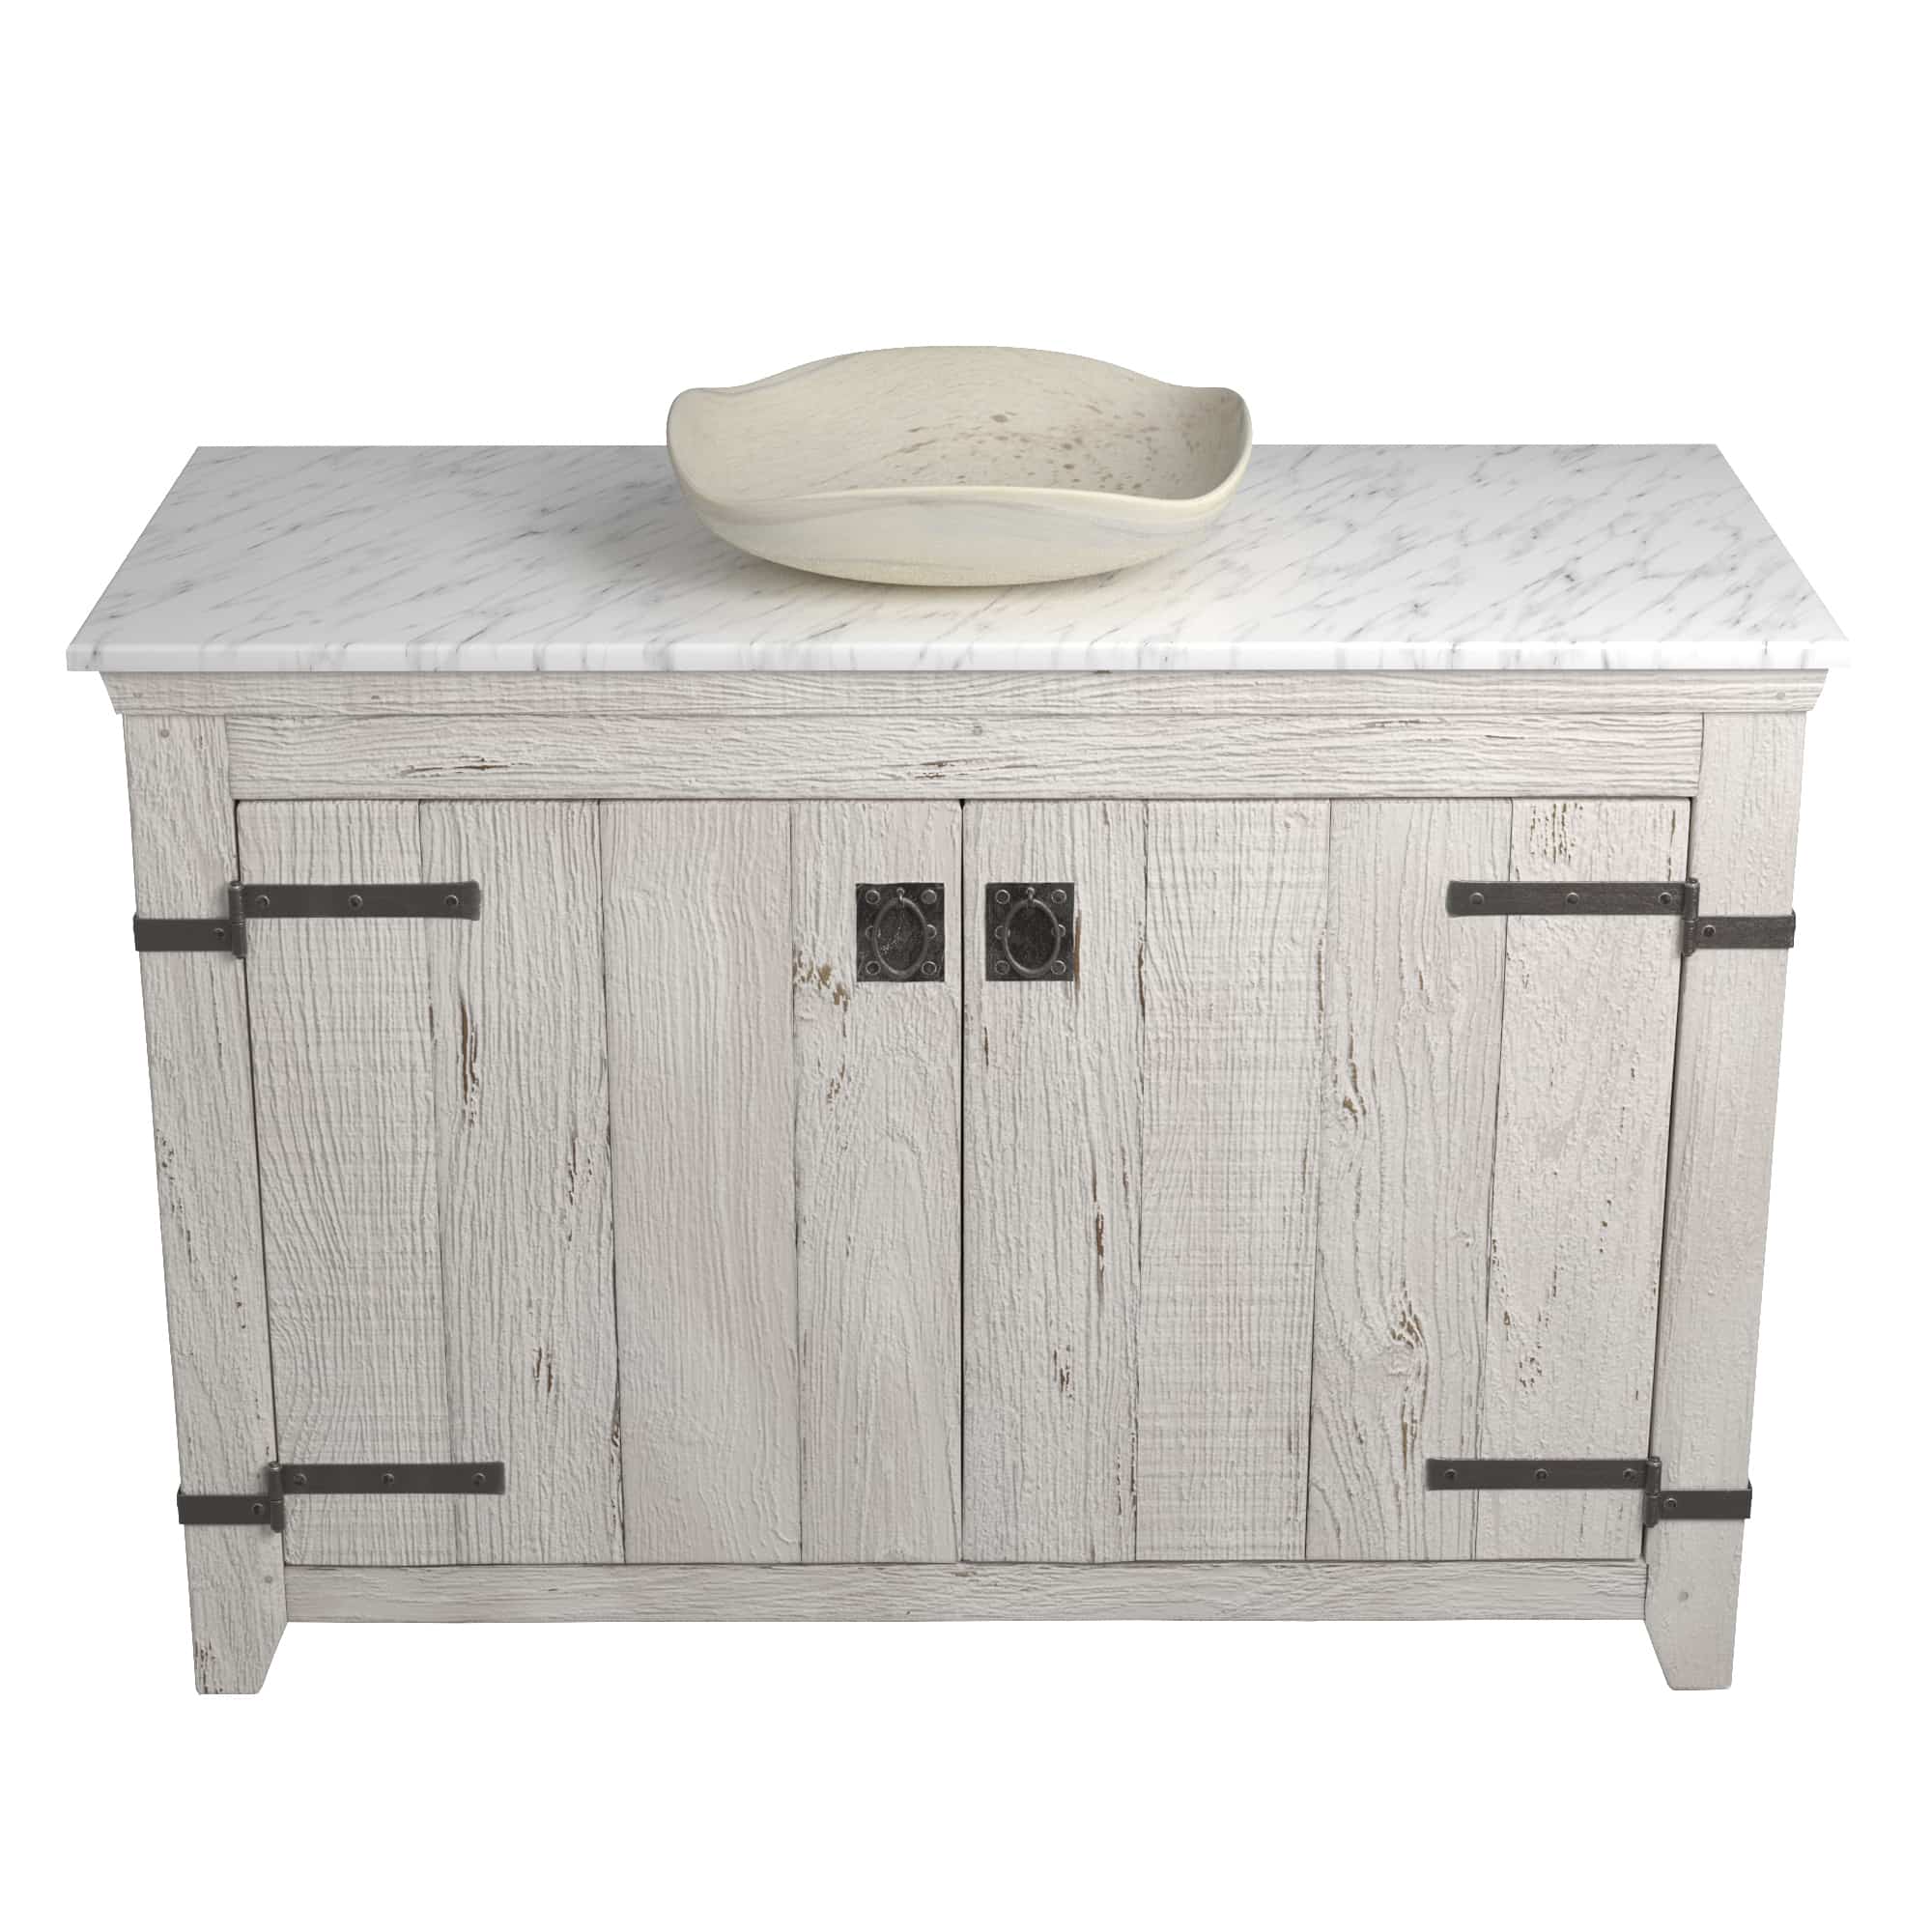 Native Trails 48" Americana Vanity in Whitewash with Carrara Marble Top and Lido in Beachcomber, No Faucet Hole, BND48-VB-CT-MG-018